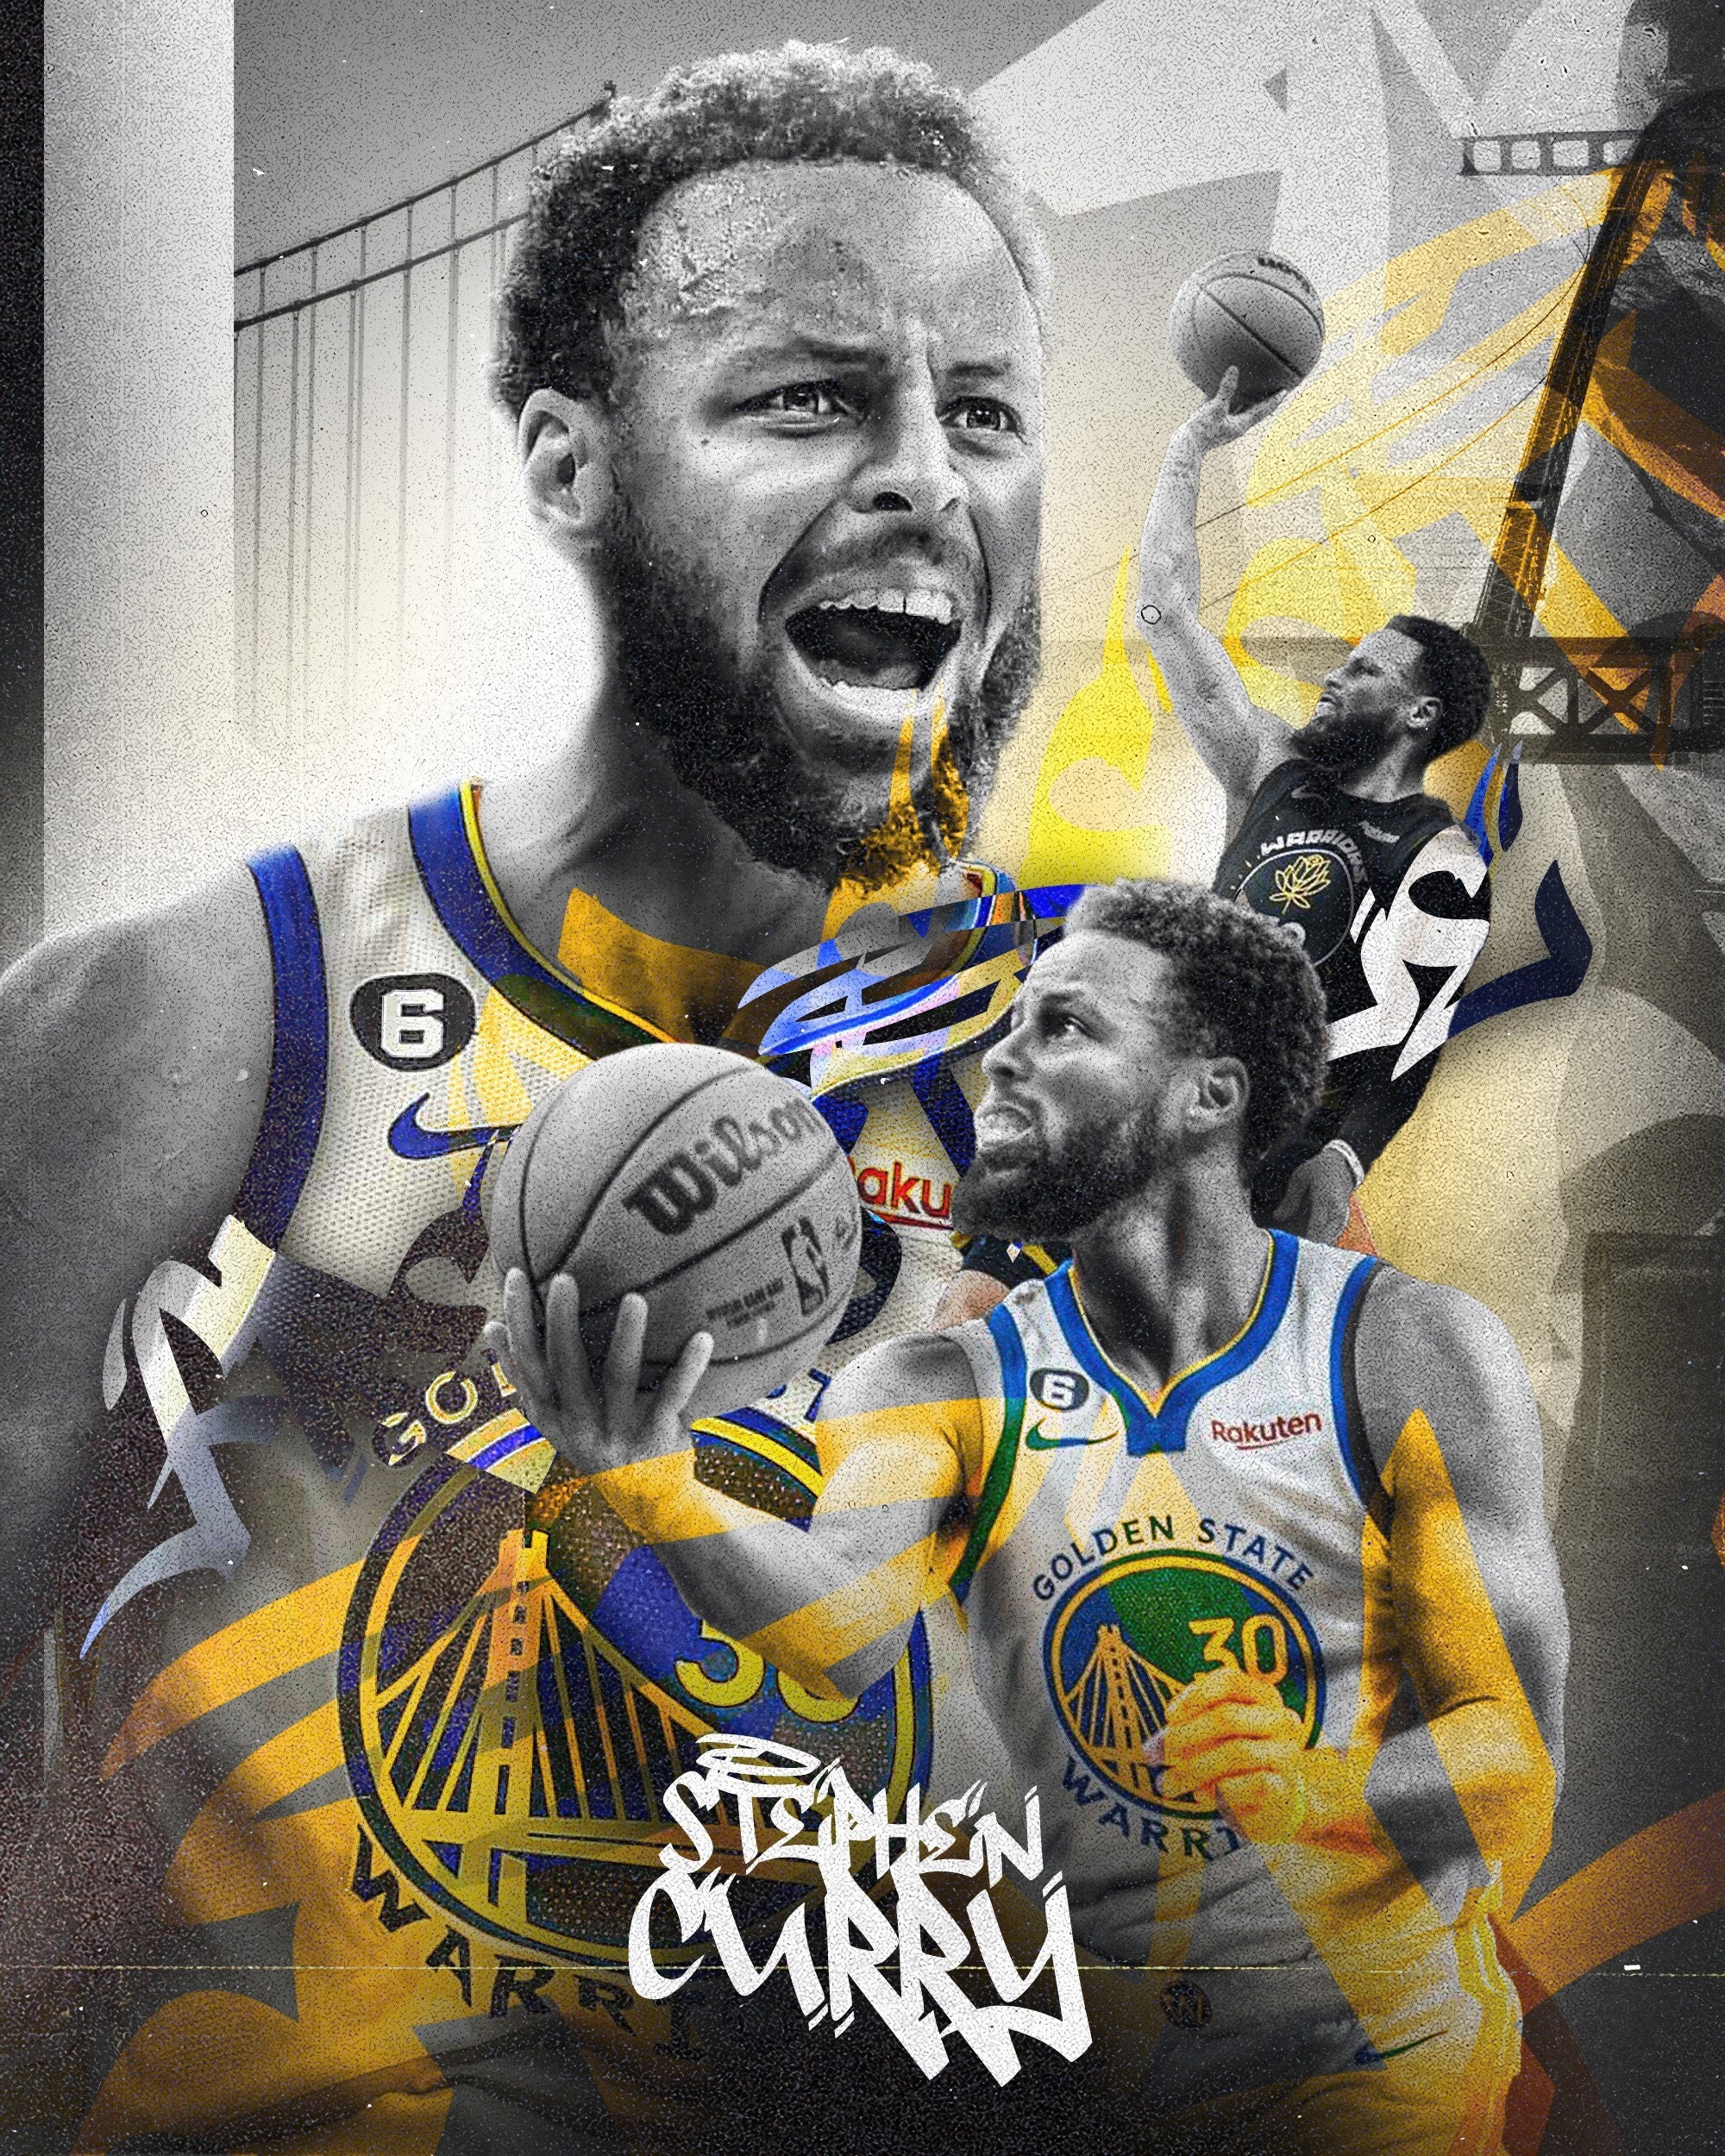 Steph Curry Wallpaper Discover more American Basketball National  Professionall Shooter wallp  Curry wallpaper Steph curry wallpapers  Stephen curry wallpaper